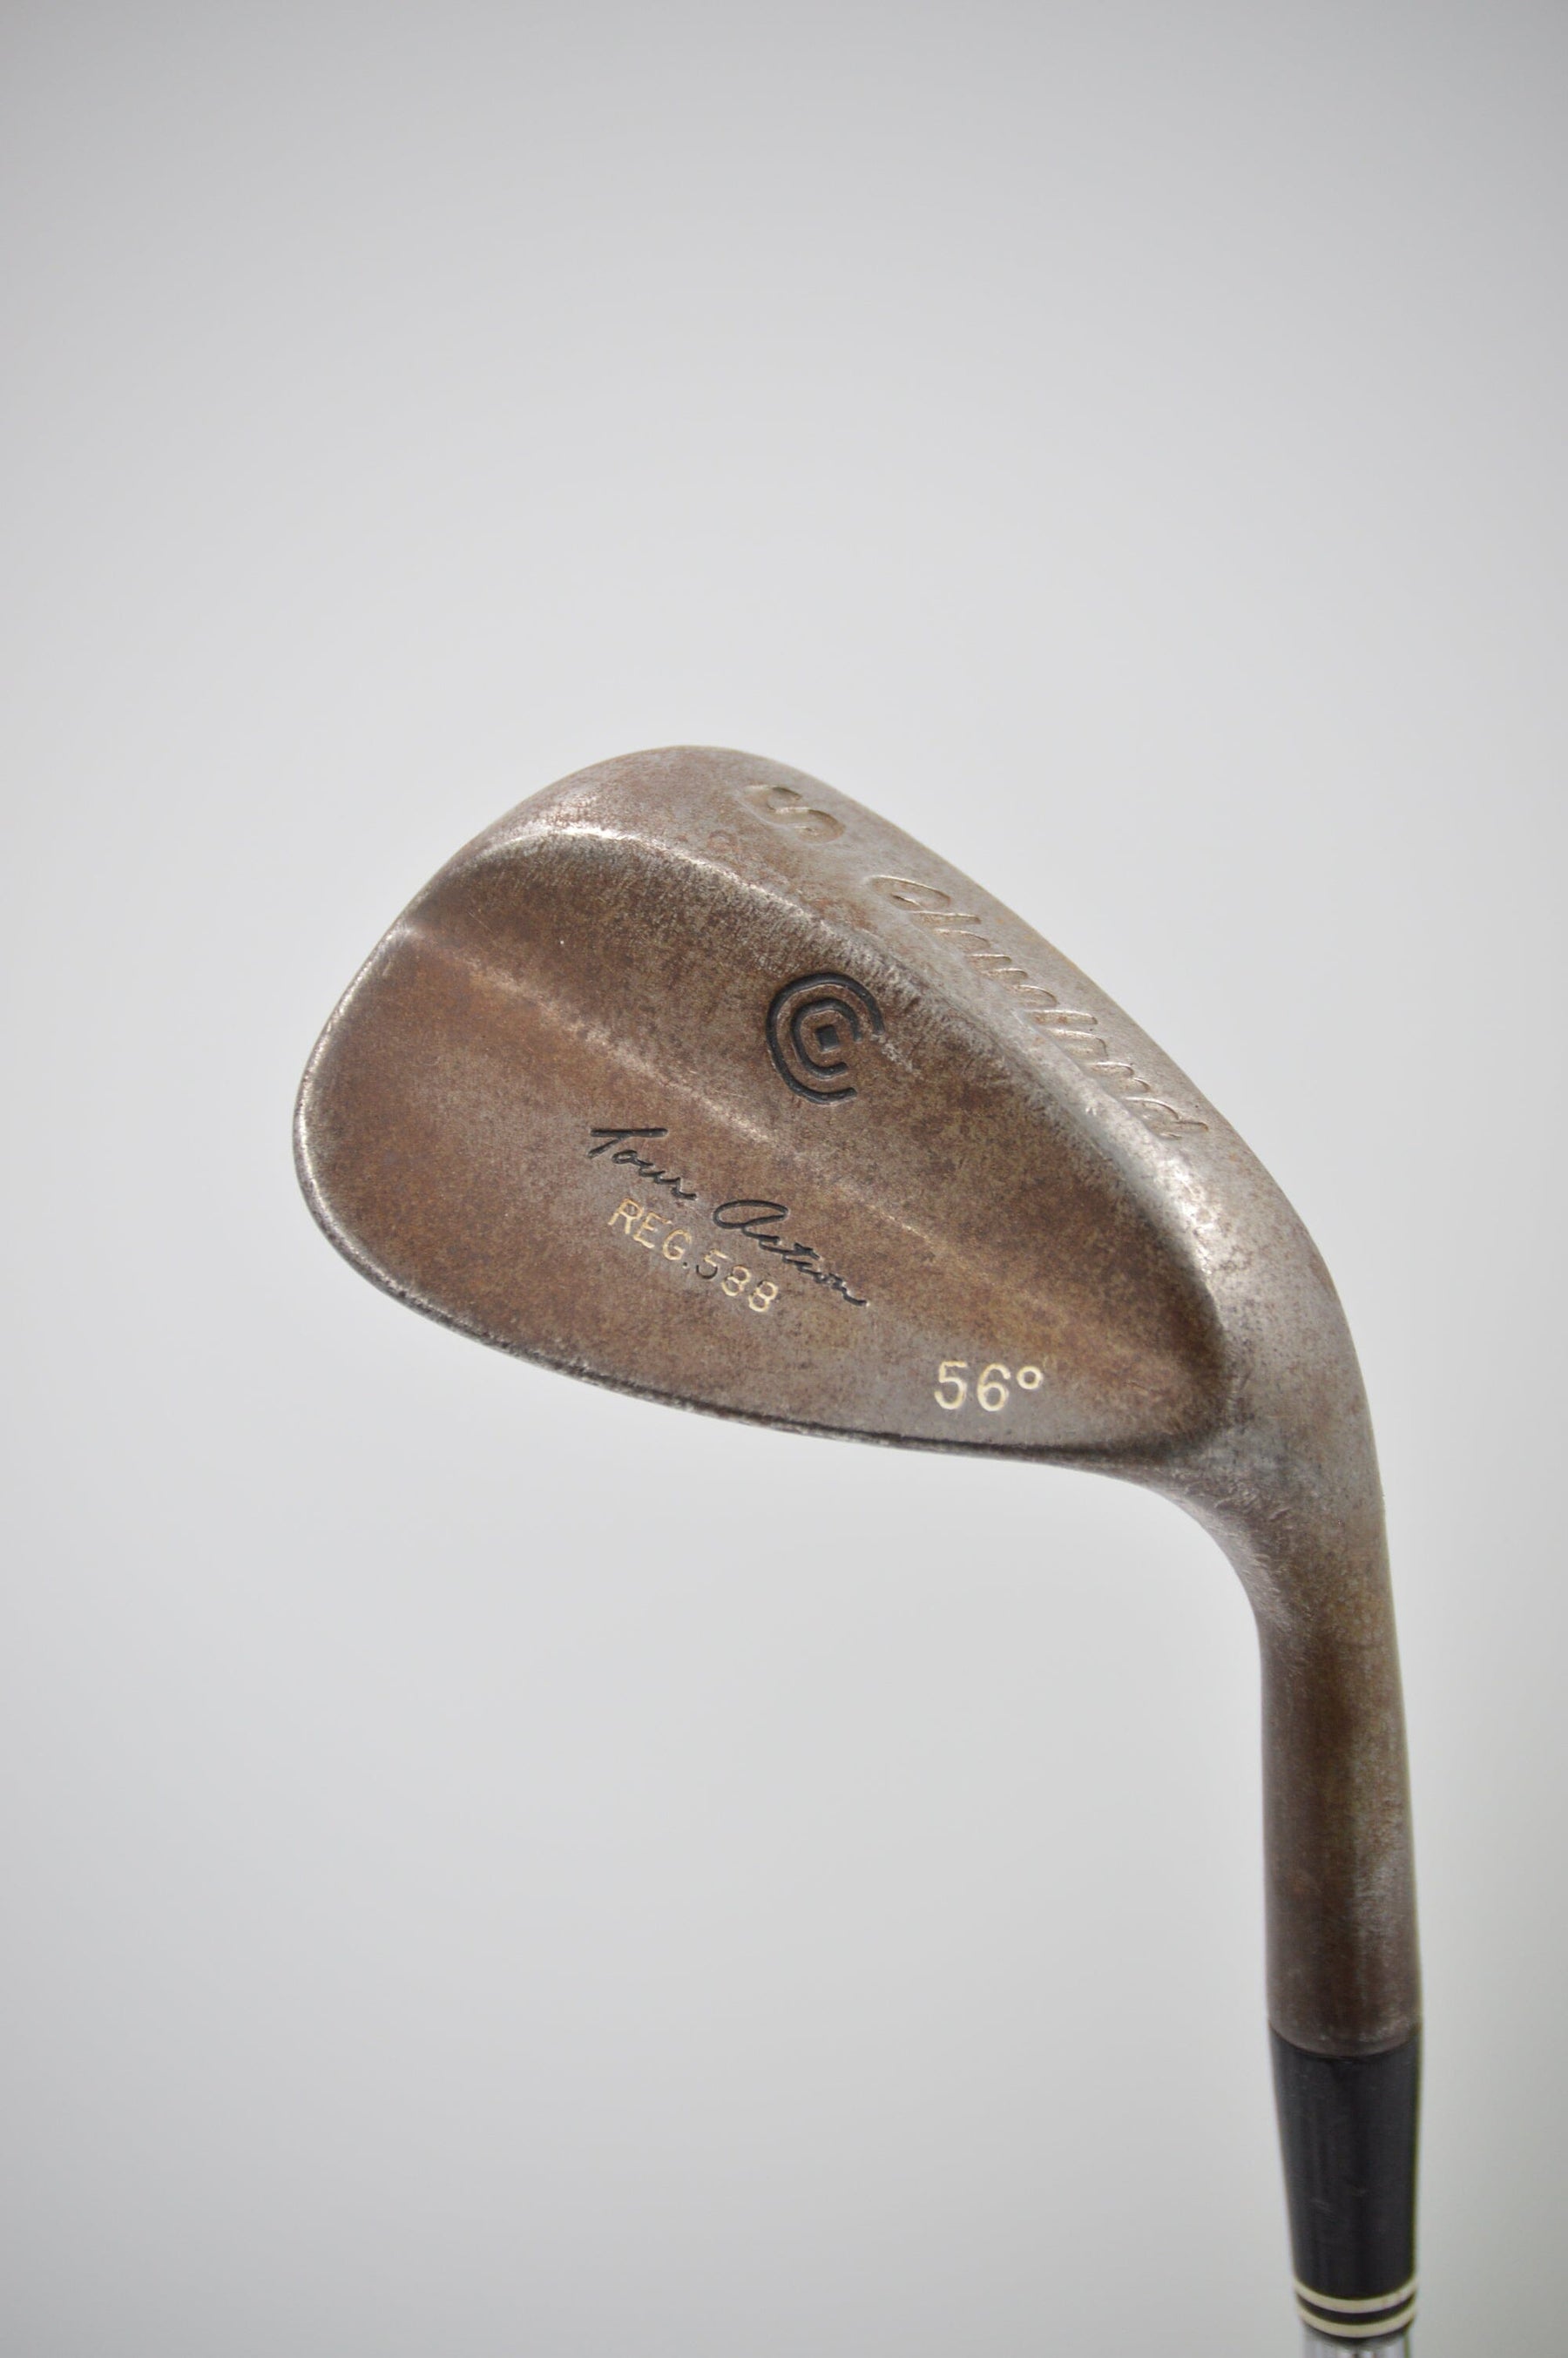 Cleveland Tour Action 56 Degree Wedge Golf Clubs GolfRoots 